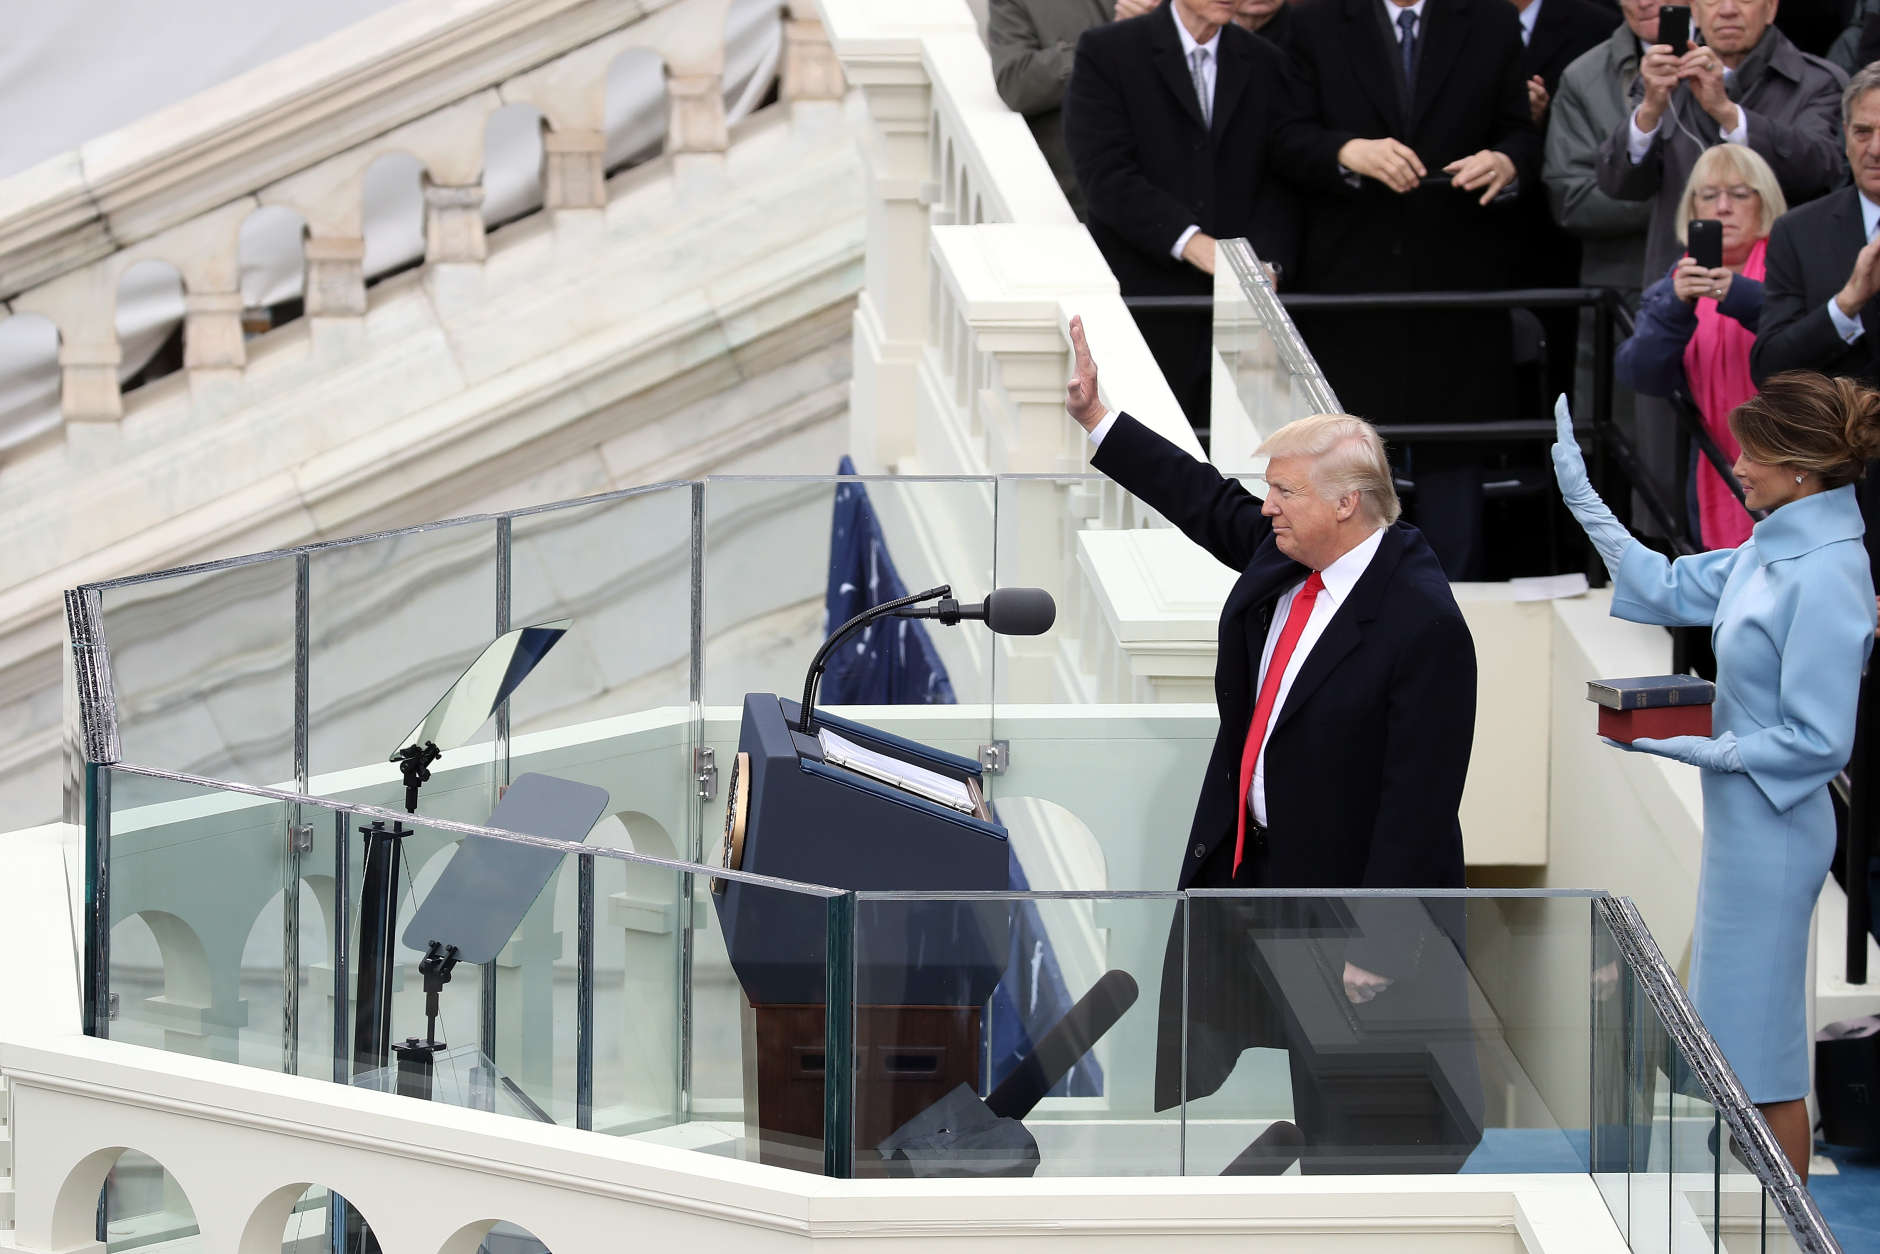 WASHINGTON, DC - JANUARY 20:  U.S. President Donald Trump and his wife Melania Trump wave after he took the oath of office on the West Front of the U.S. Capitol on January 20, 2017 in Washington, DC. In today's inauguration ceremony Donald J. Trump becomes the 45th president of the United States.  (Photo by Drew Angerer/Getty Images)